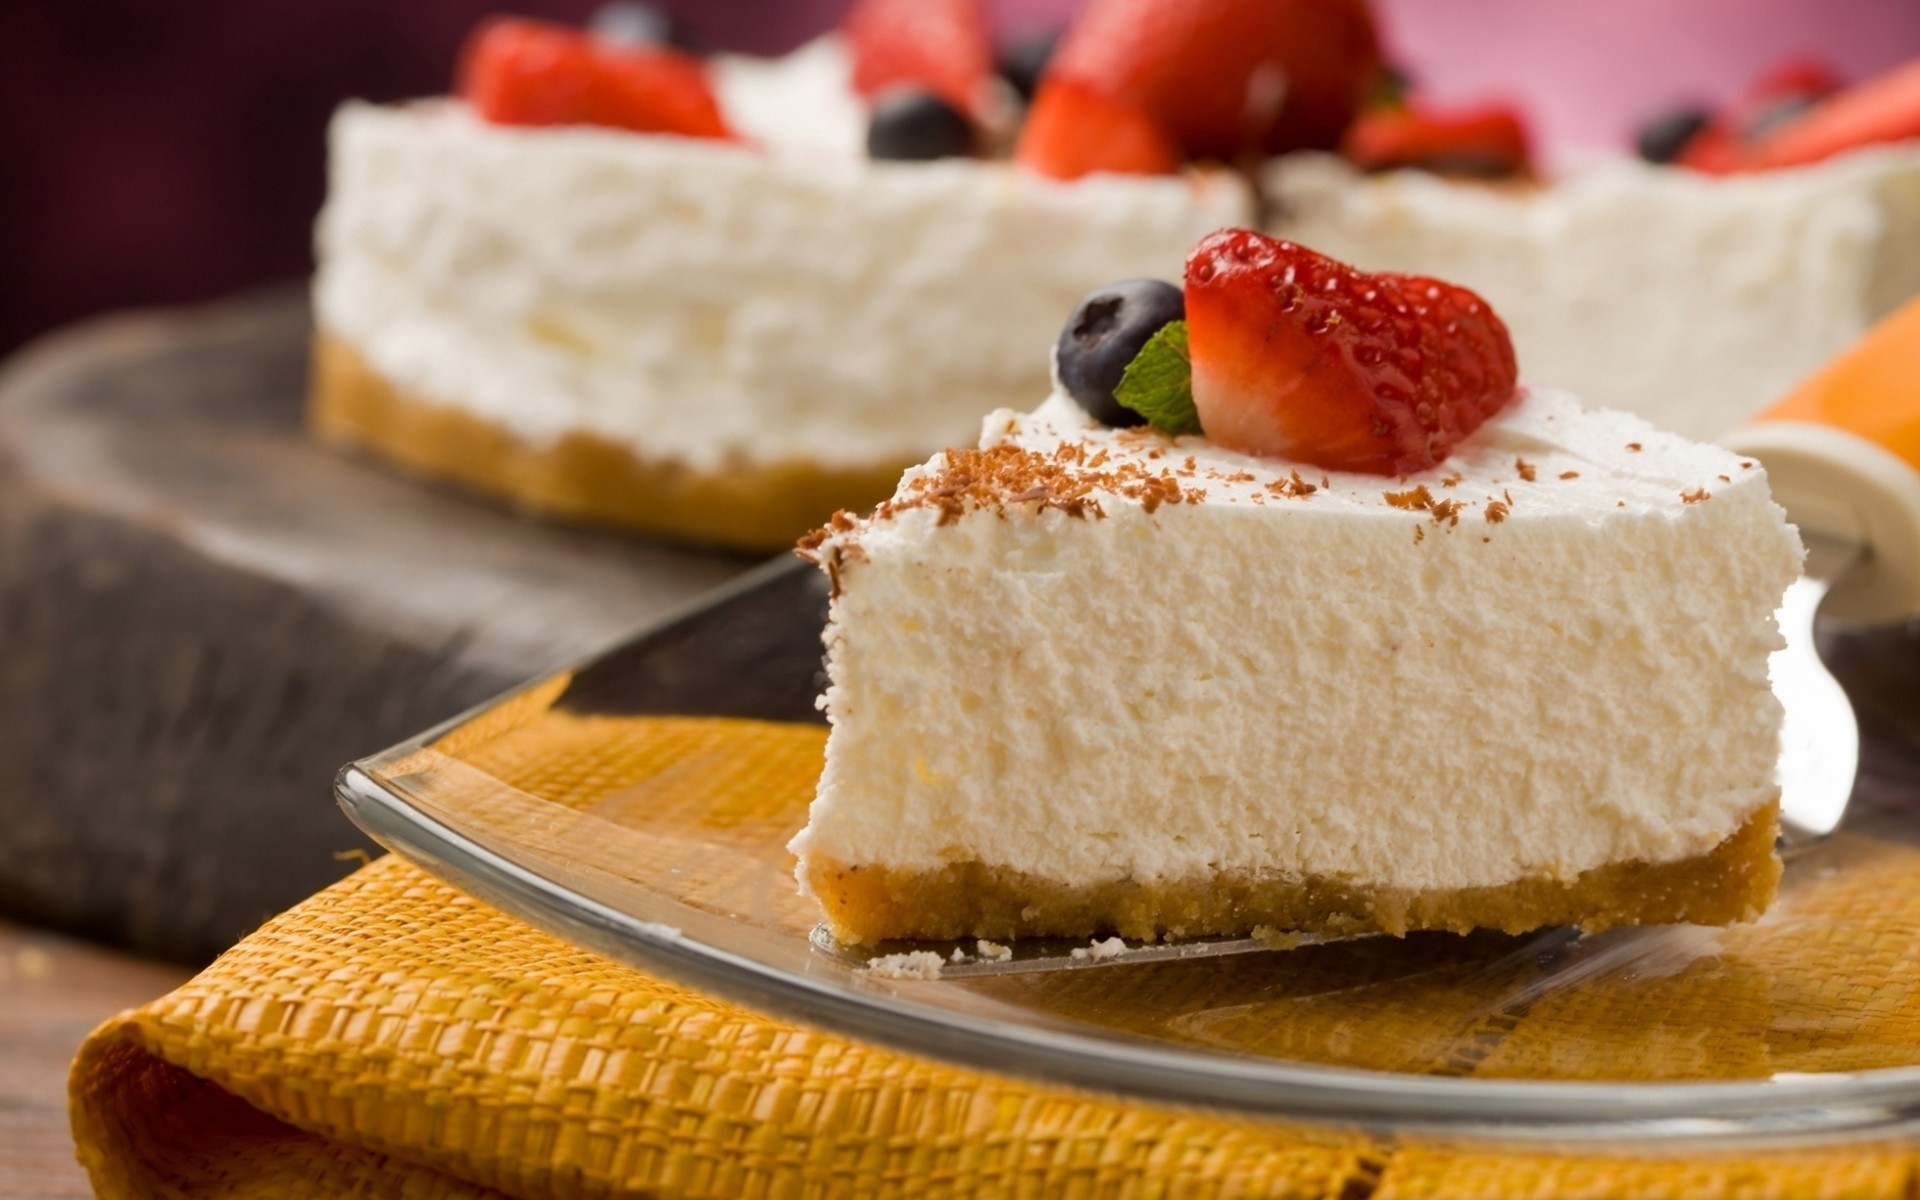 Strawberry Topped Cheesecake Wallpaper - Cheesecake Hd , HD Wallpaper & Backgrounds